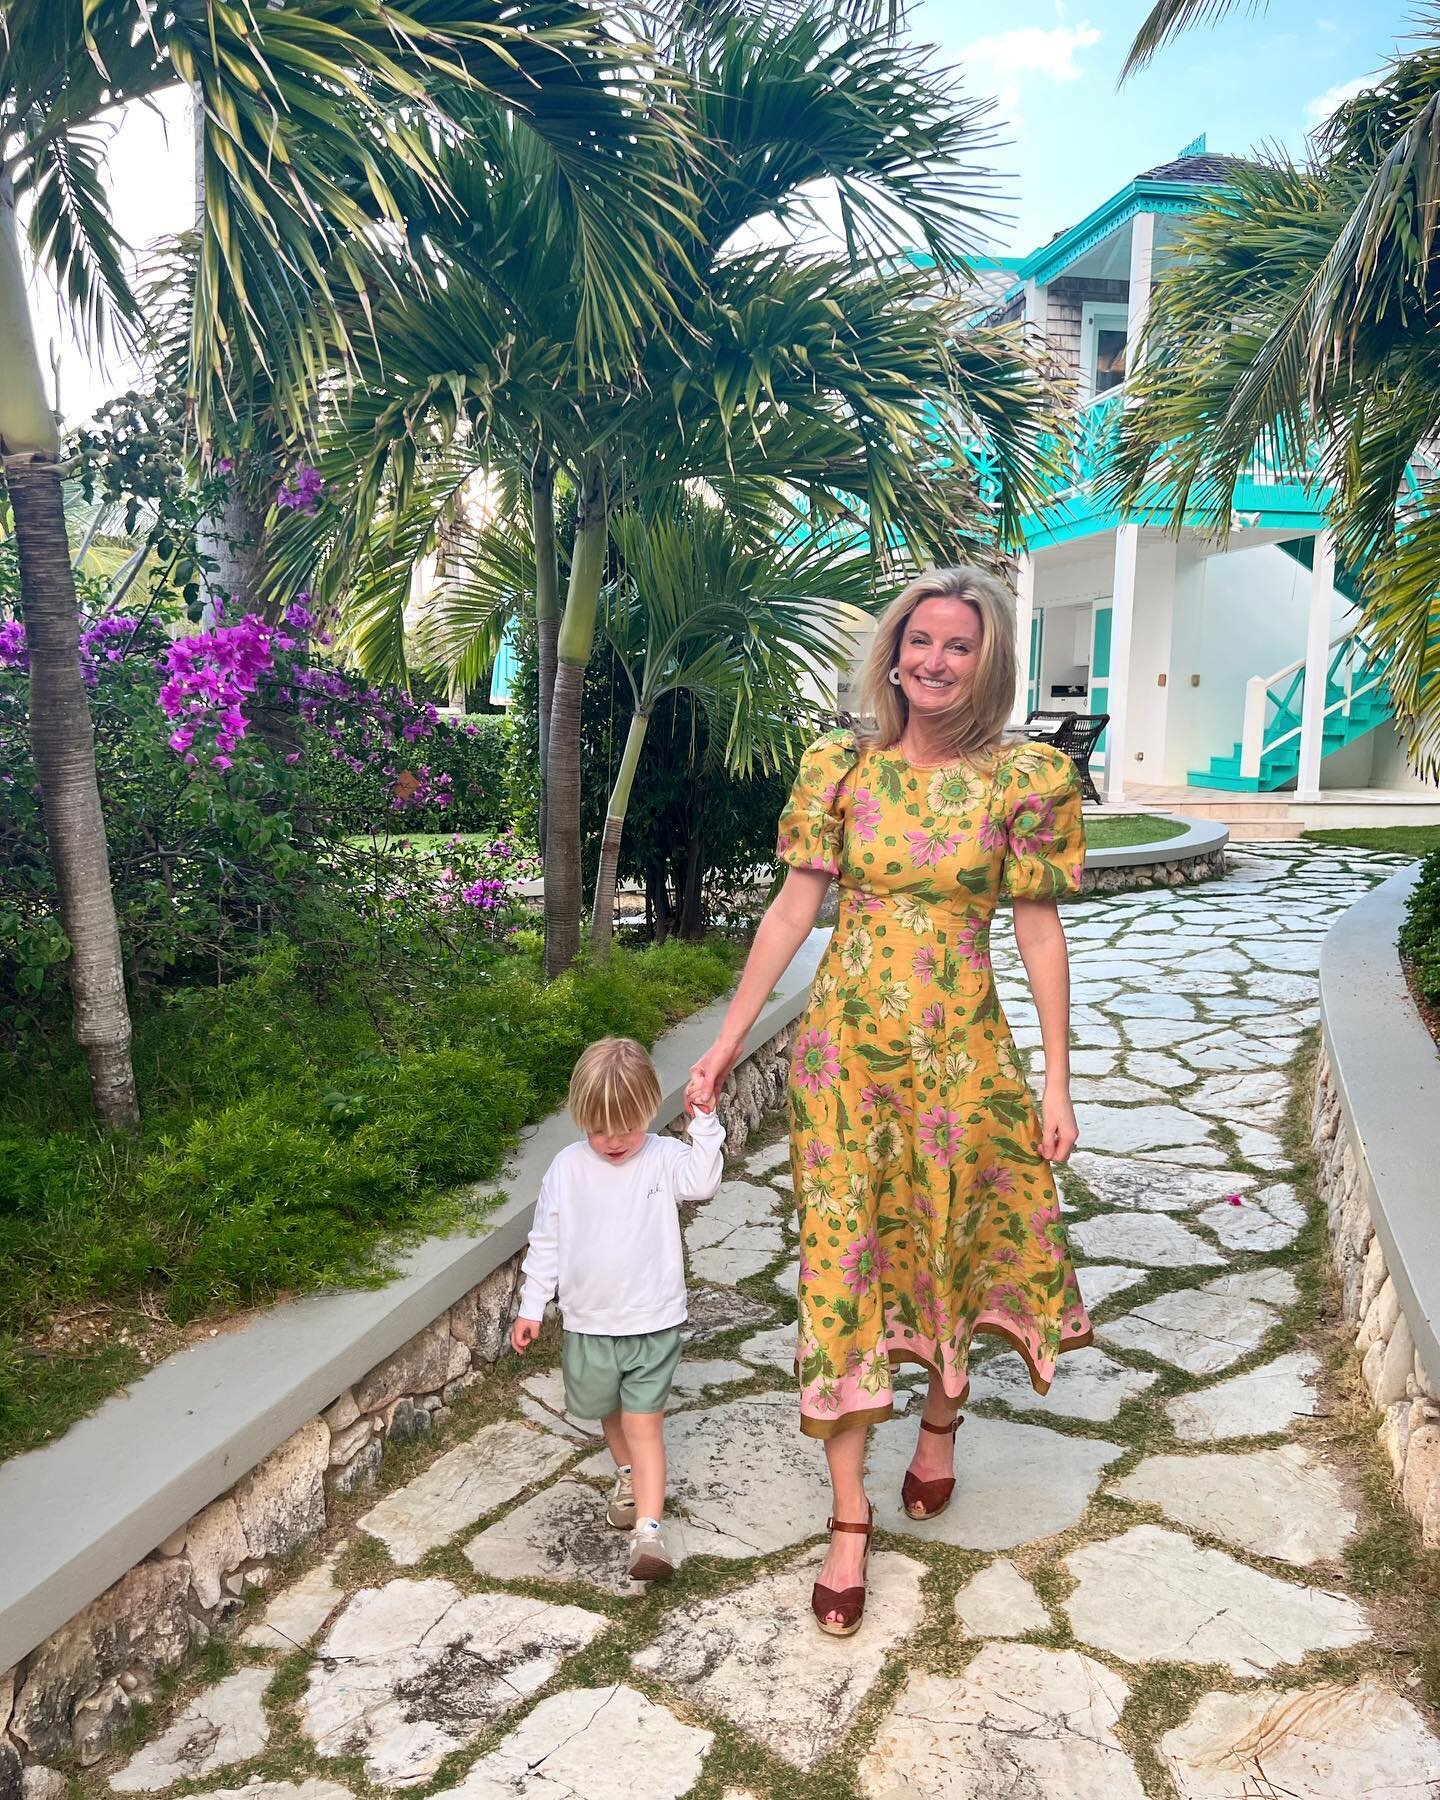 Spending a week on Anguilla felt like discovering the hidden gem on the Caribbean. Where crystal clear turquoise waters meet white sand beaches &mdash; think friendly beach shacks instead of designer shopping. This little island is a natural sanctuar